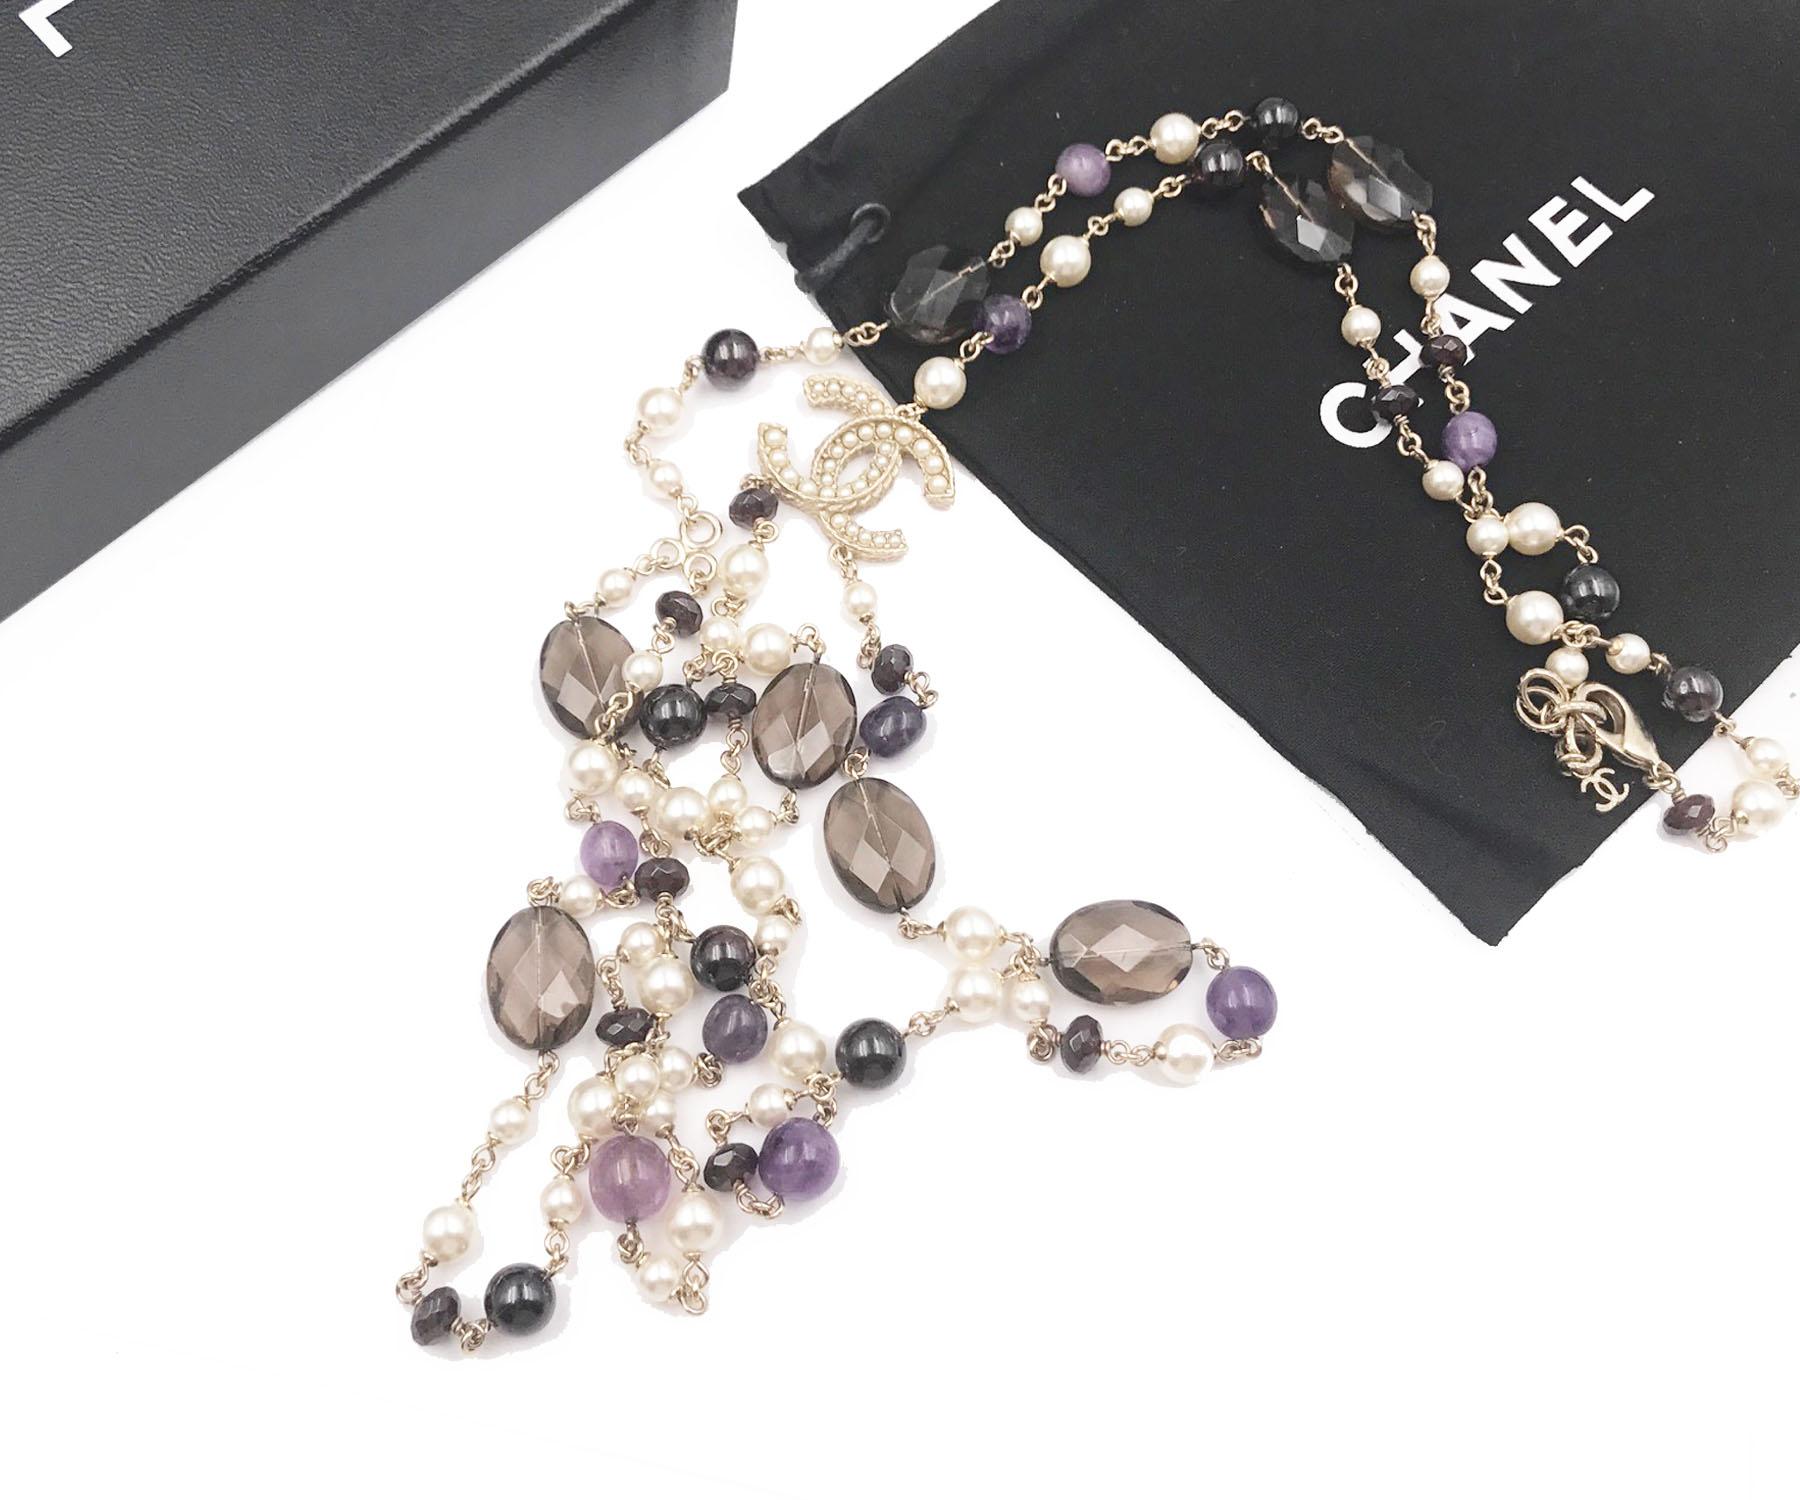 Chanel Gold Twisted CC 2 Strand Purple Brown Stone Faux Pearl Long Necklace

* Marked 14
* Made in France
* Comes with the original box and dustbag

-It's approximately 45″ long.
-TheCC pendant is approximately 0.9″ x 1.25″.
-Very shiny and